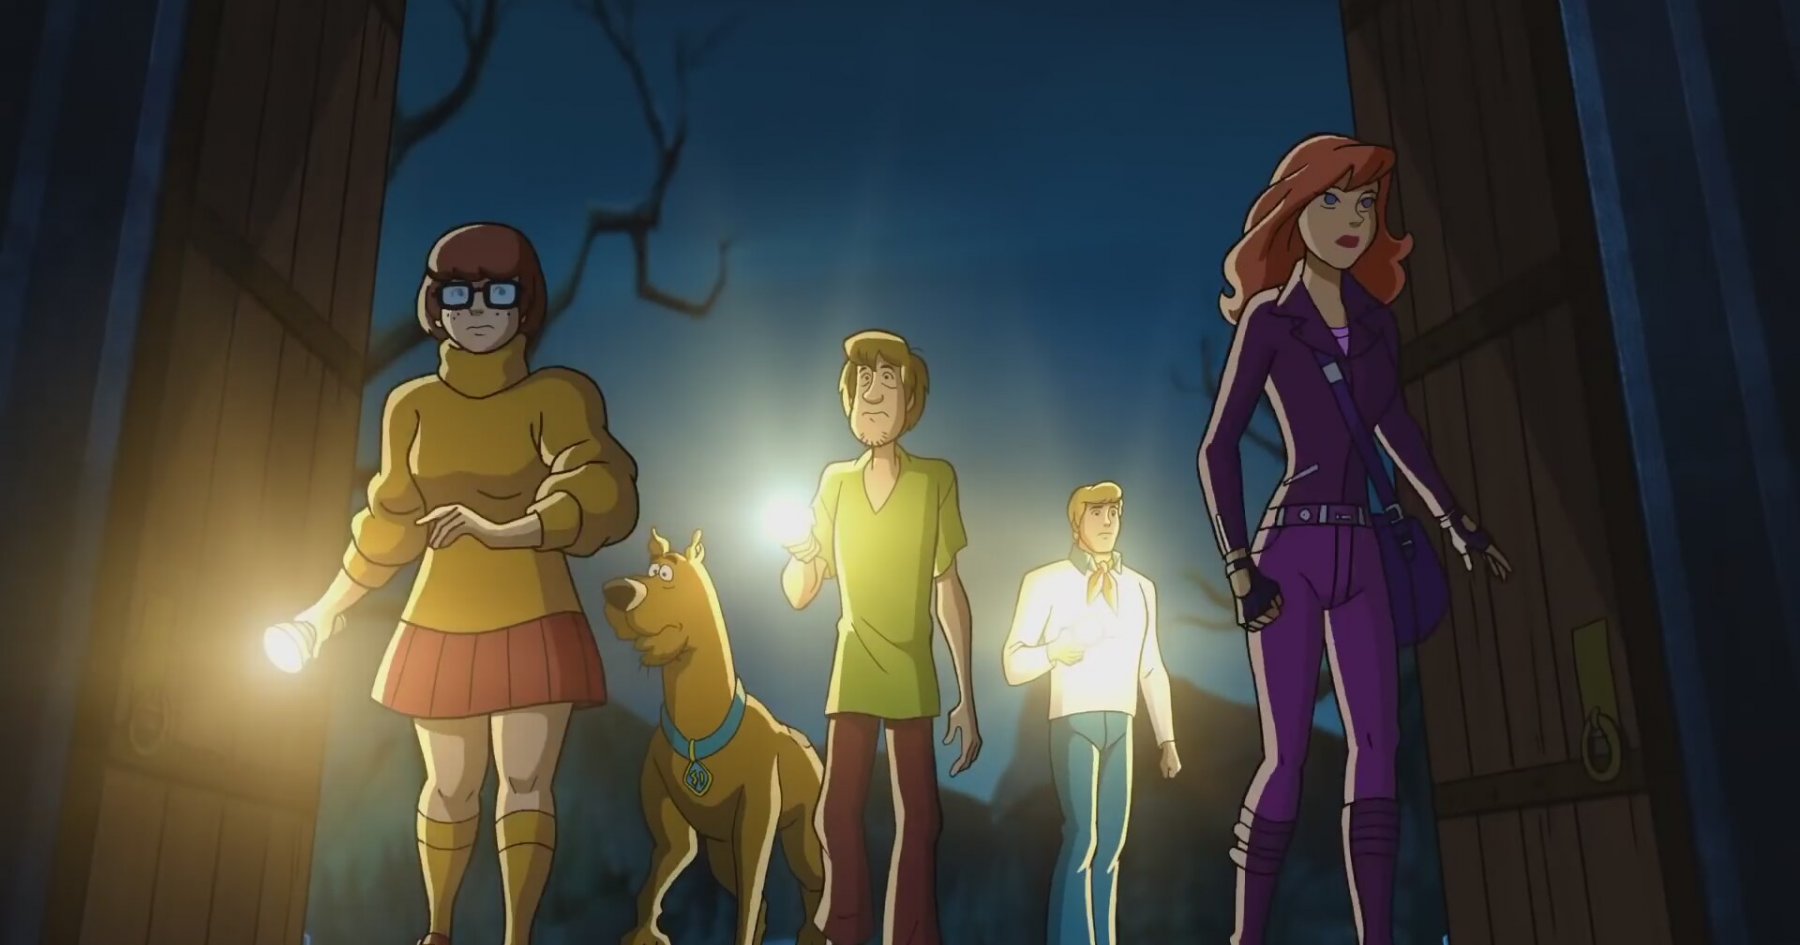 2019 Scooby-Doo! And The Curse Of The 13th Ghost